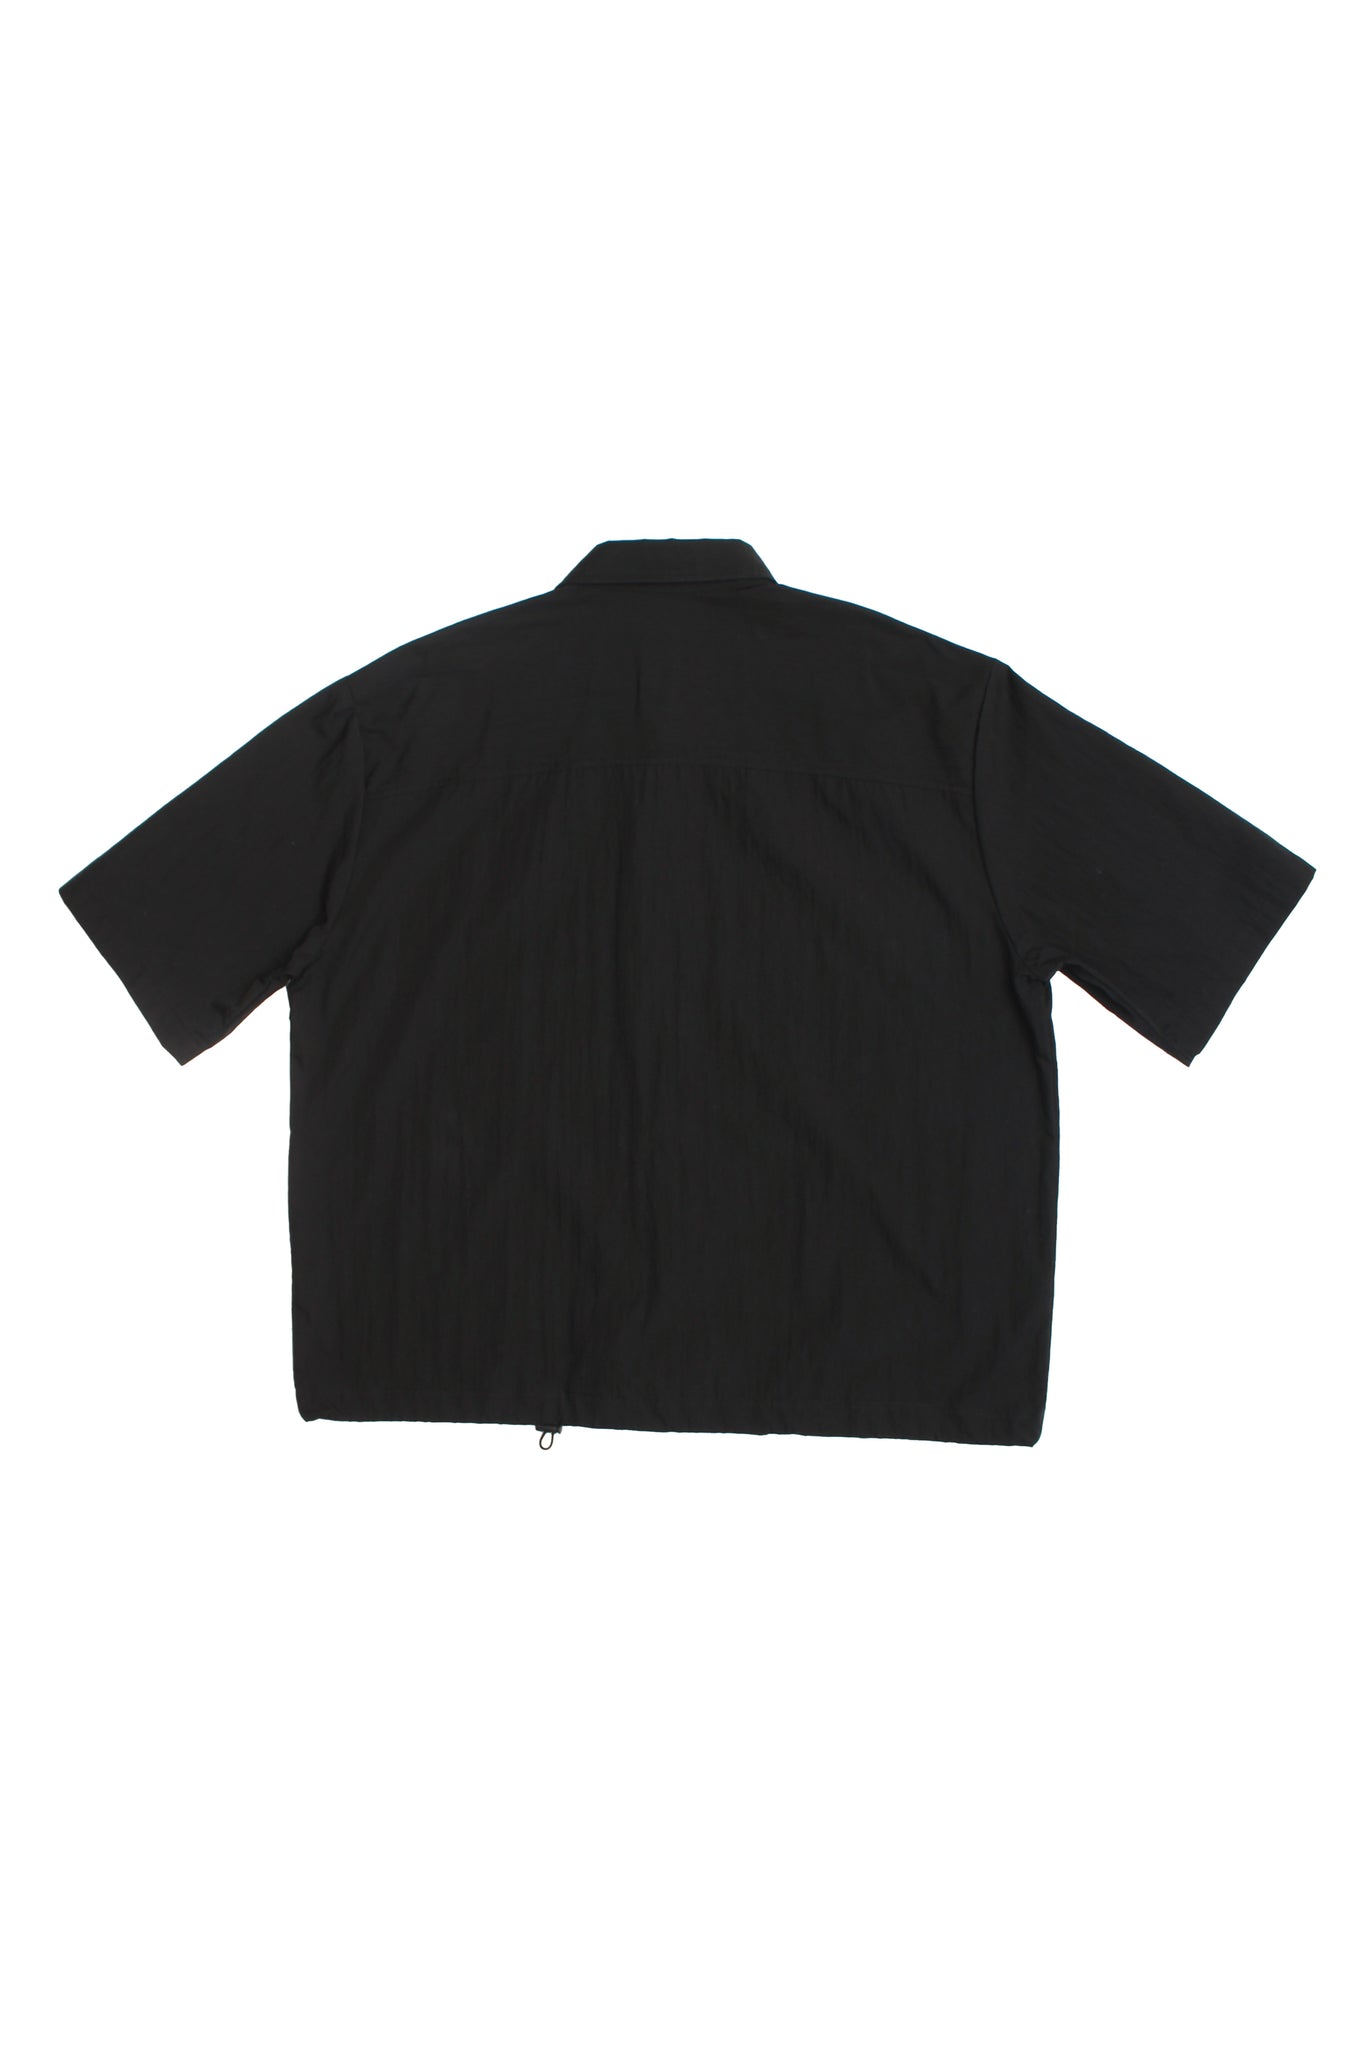 Two Pocket String Shirts in Black